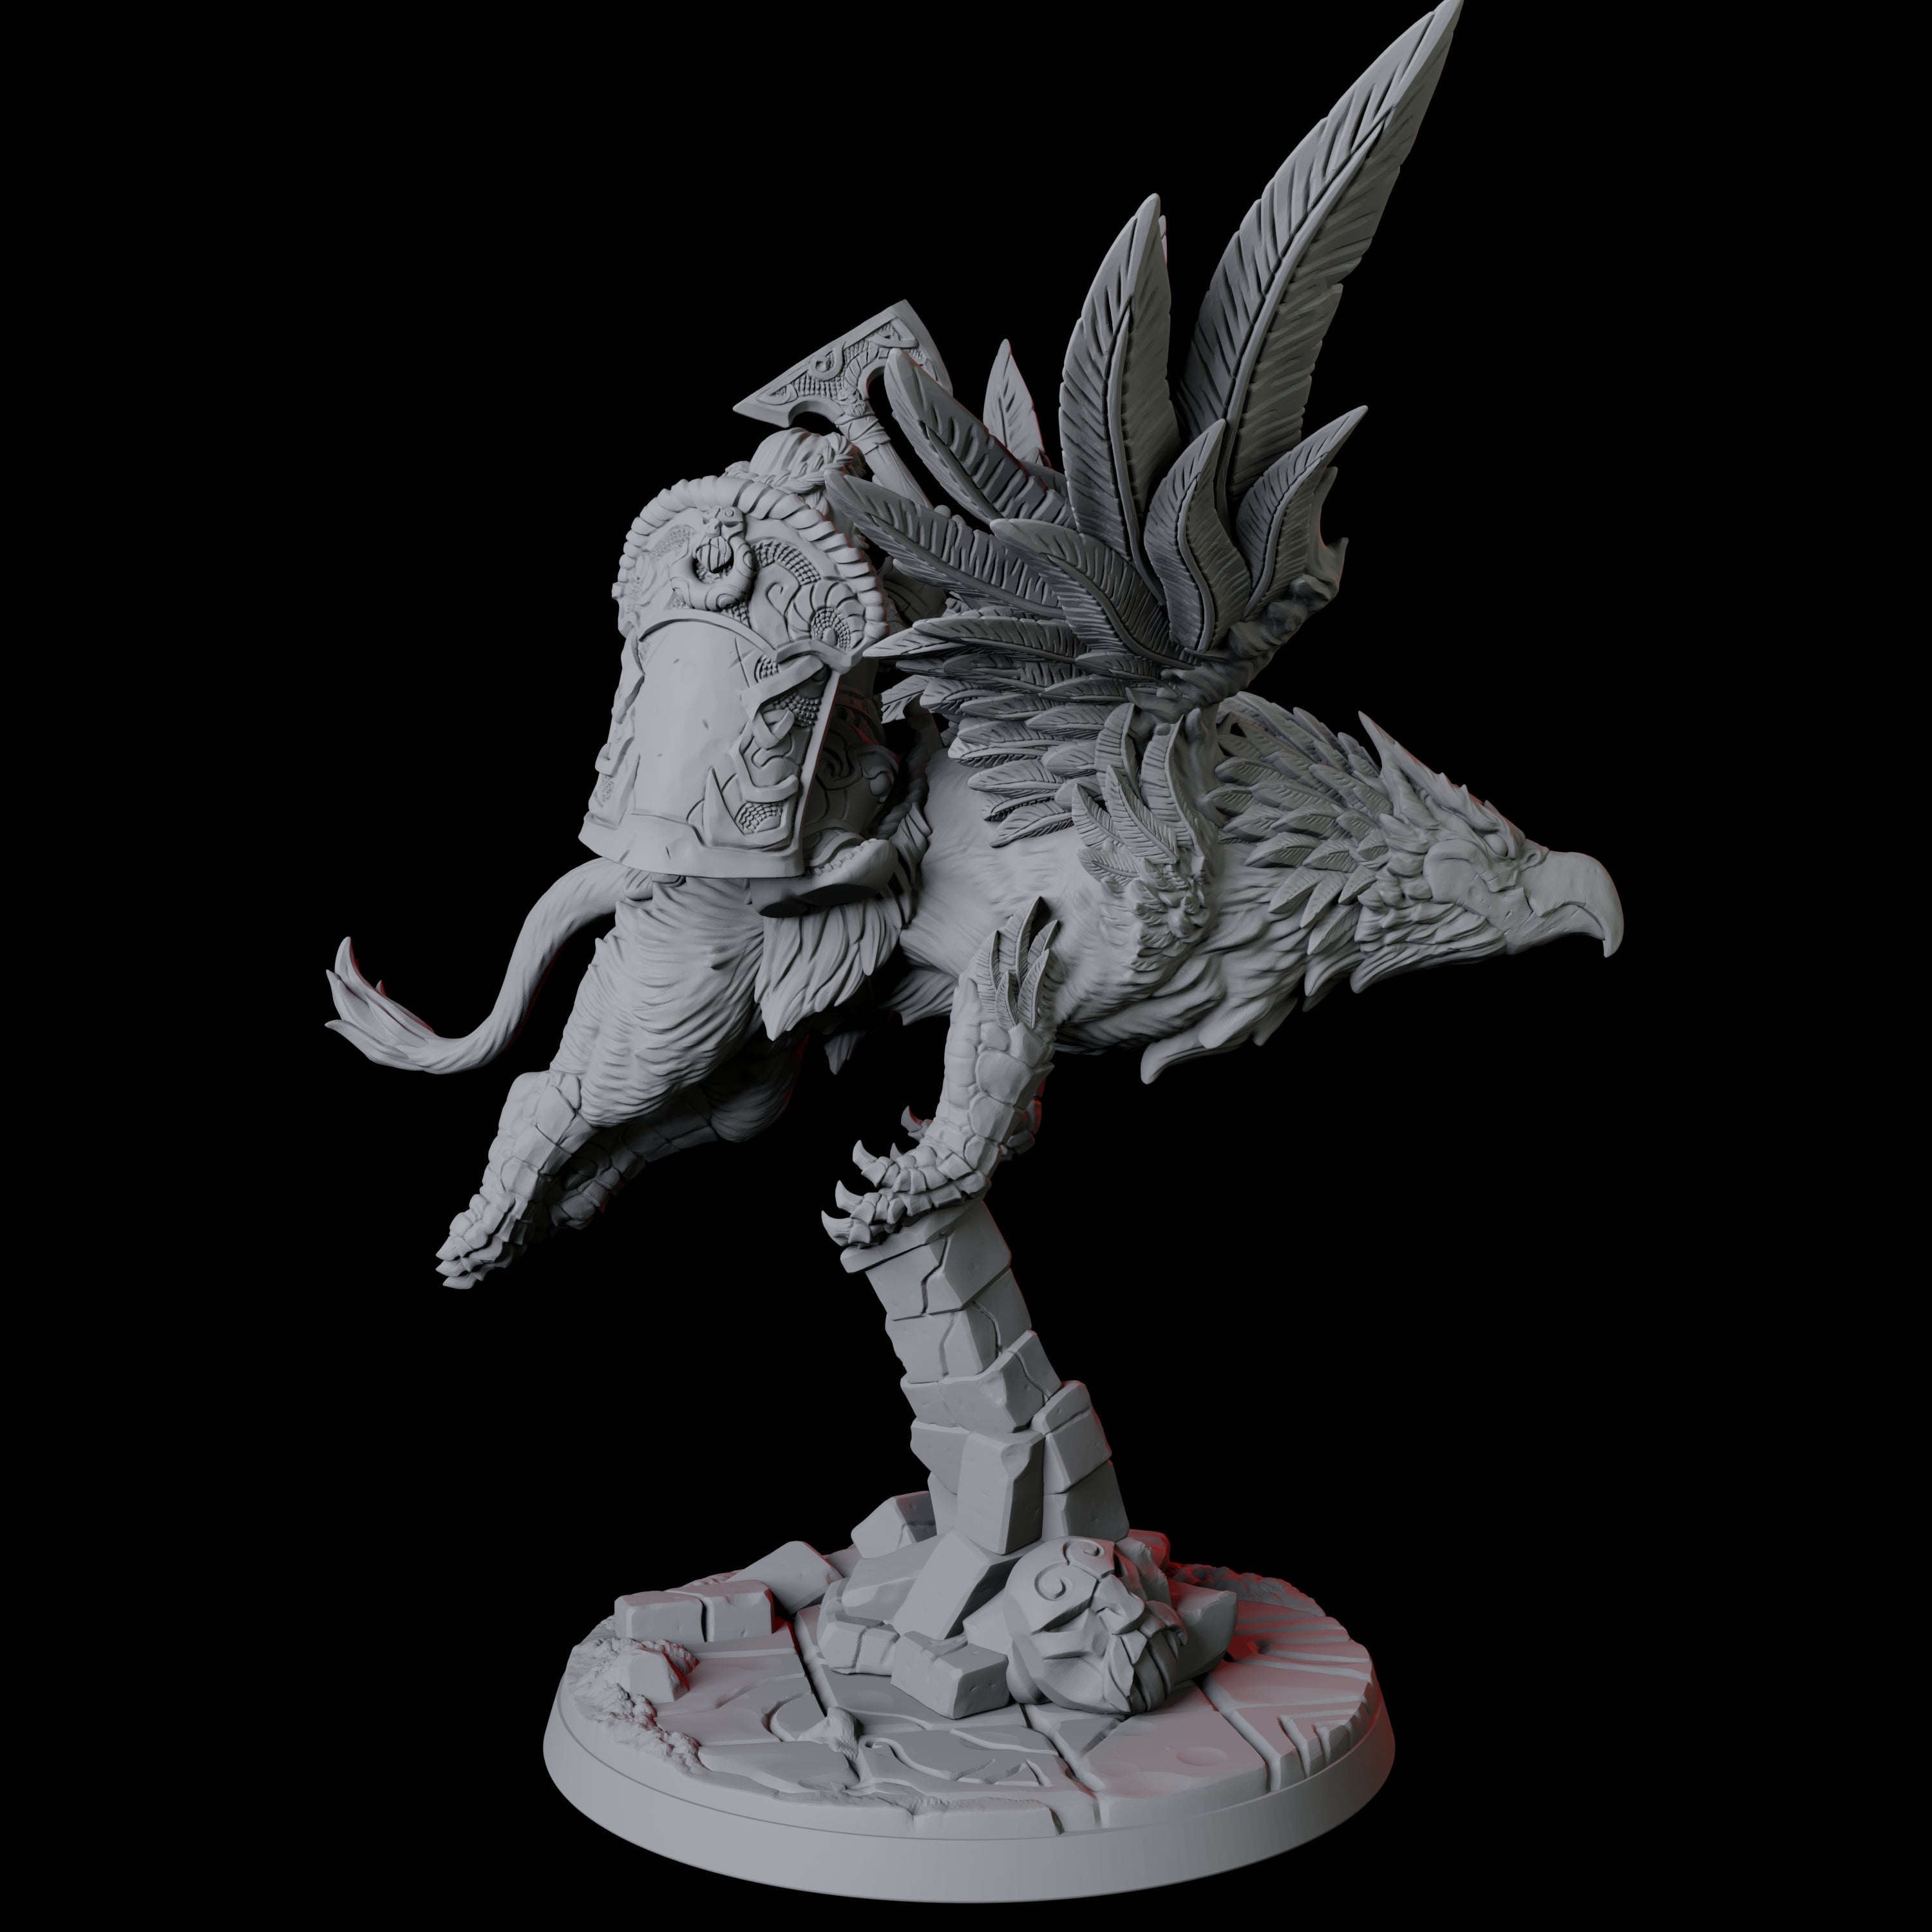 Dwarf Sky Cavalry Miniature for Dungeons and Dragons, Pathfinder or other TTRPGs